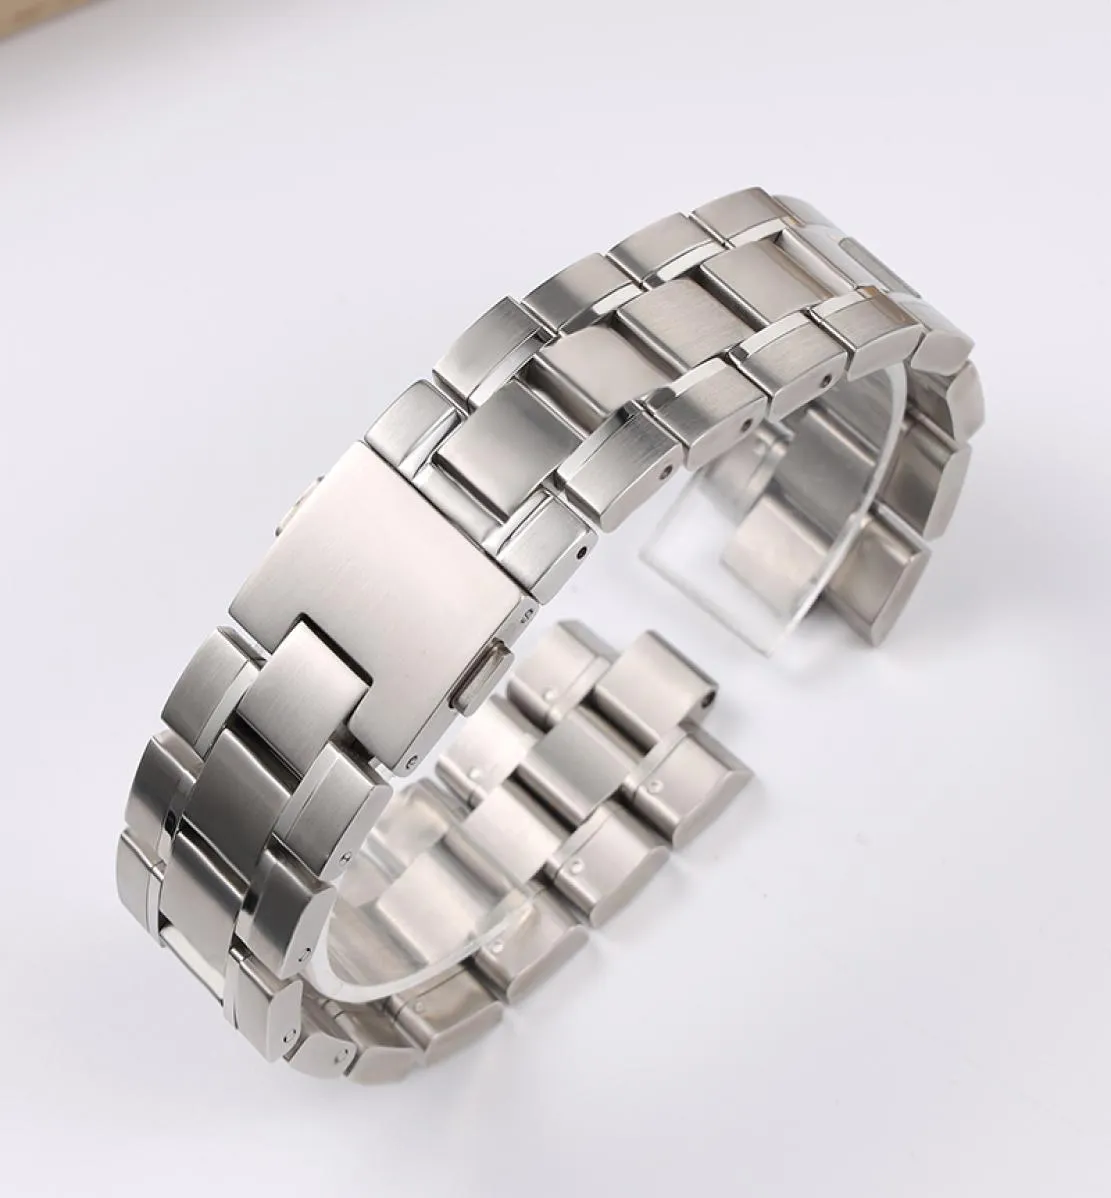 New 20mm 22mm Silver Solid Stainless Steel Watchband For Solid Curved END Deployment Clasp Wrist Bracelet For Men Logo 014435070